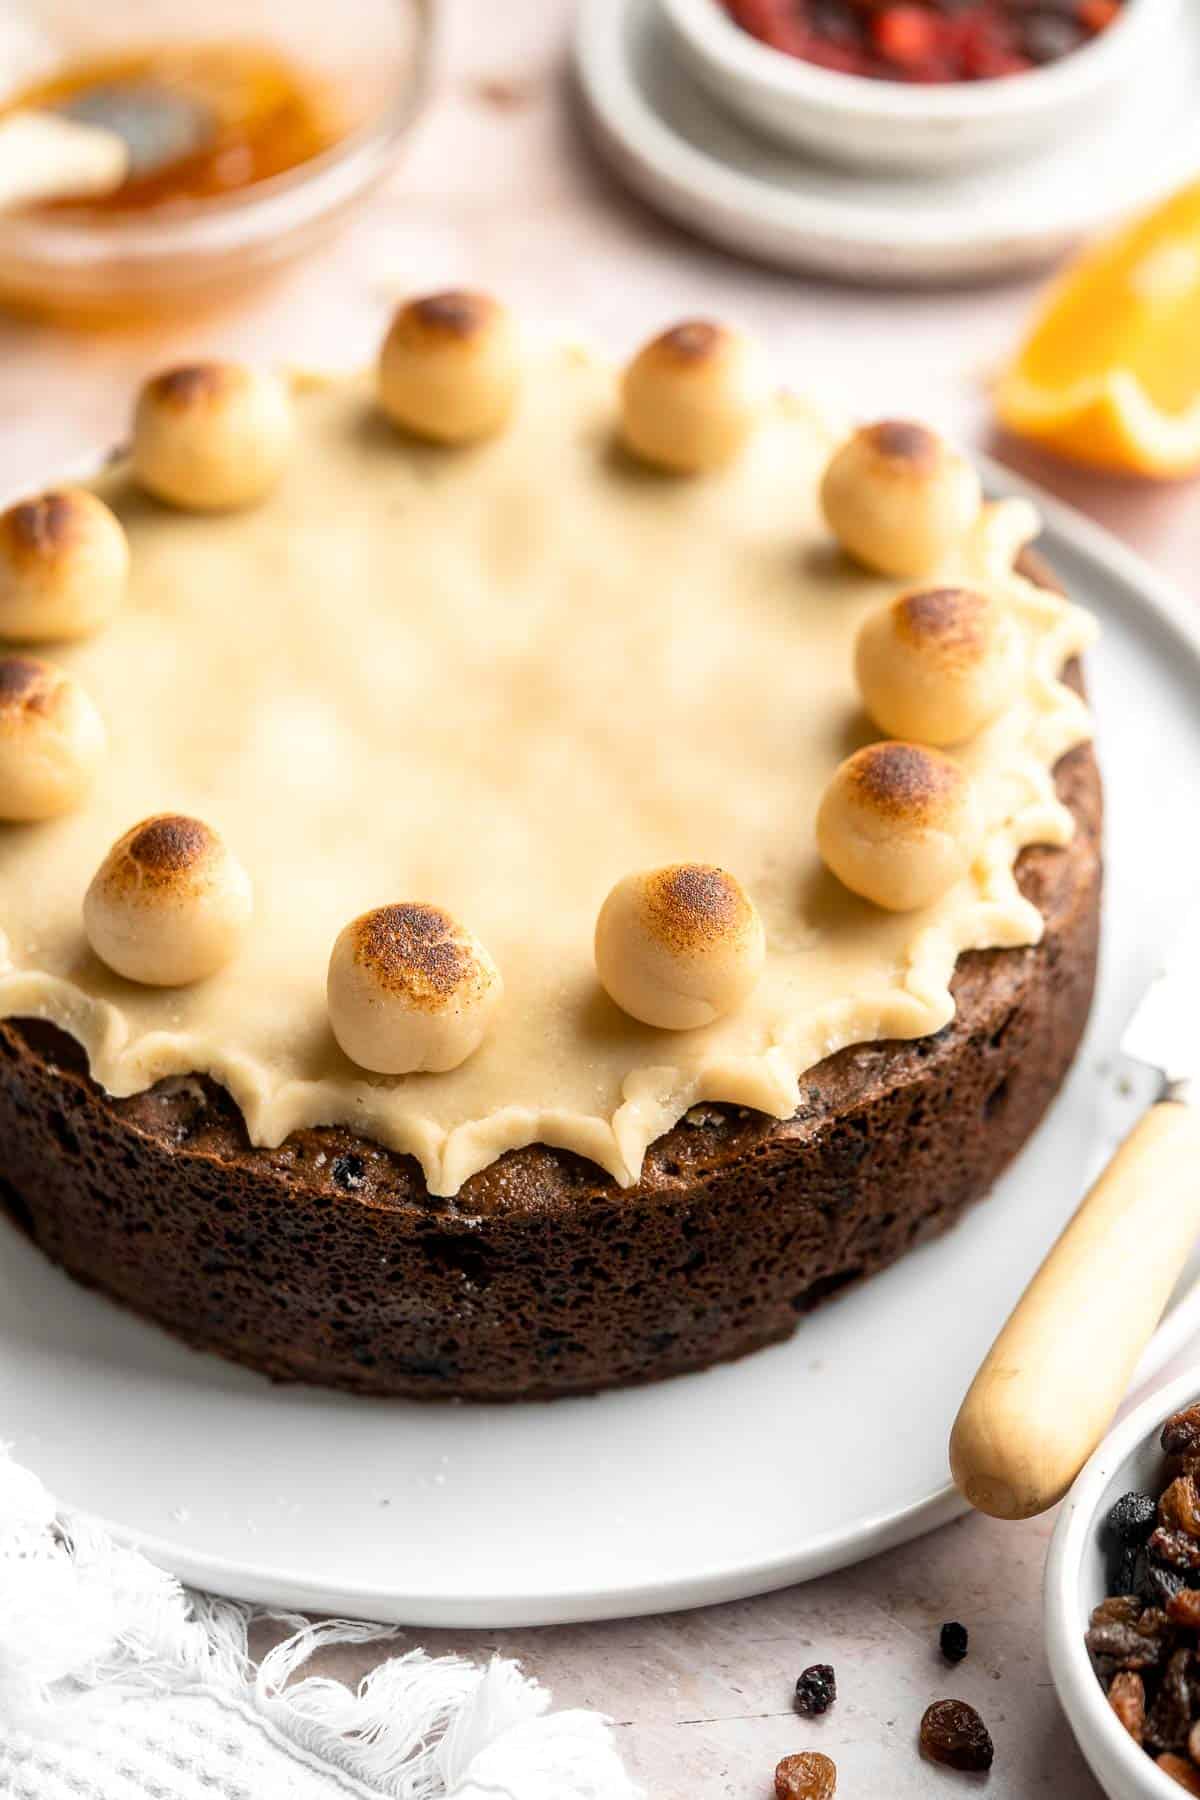 Simnel Cake is a traditional Easter fruitcake that is light and citrusy with two layers of marzipan which adds a delicious nutty flavor. | aheadofthyme.com